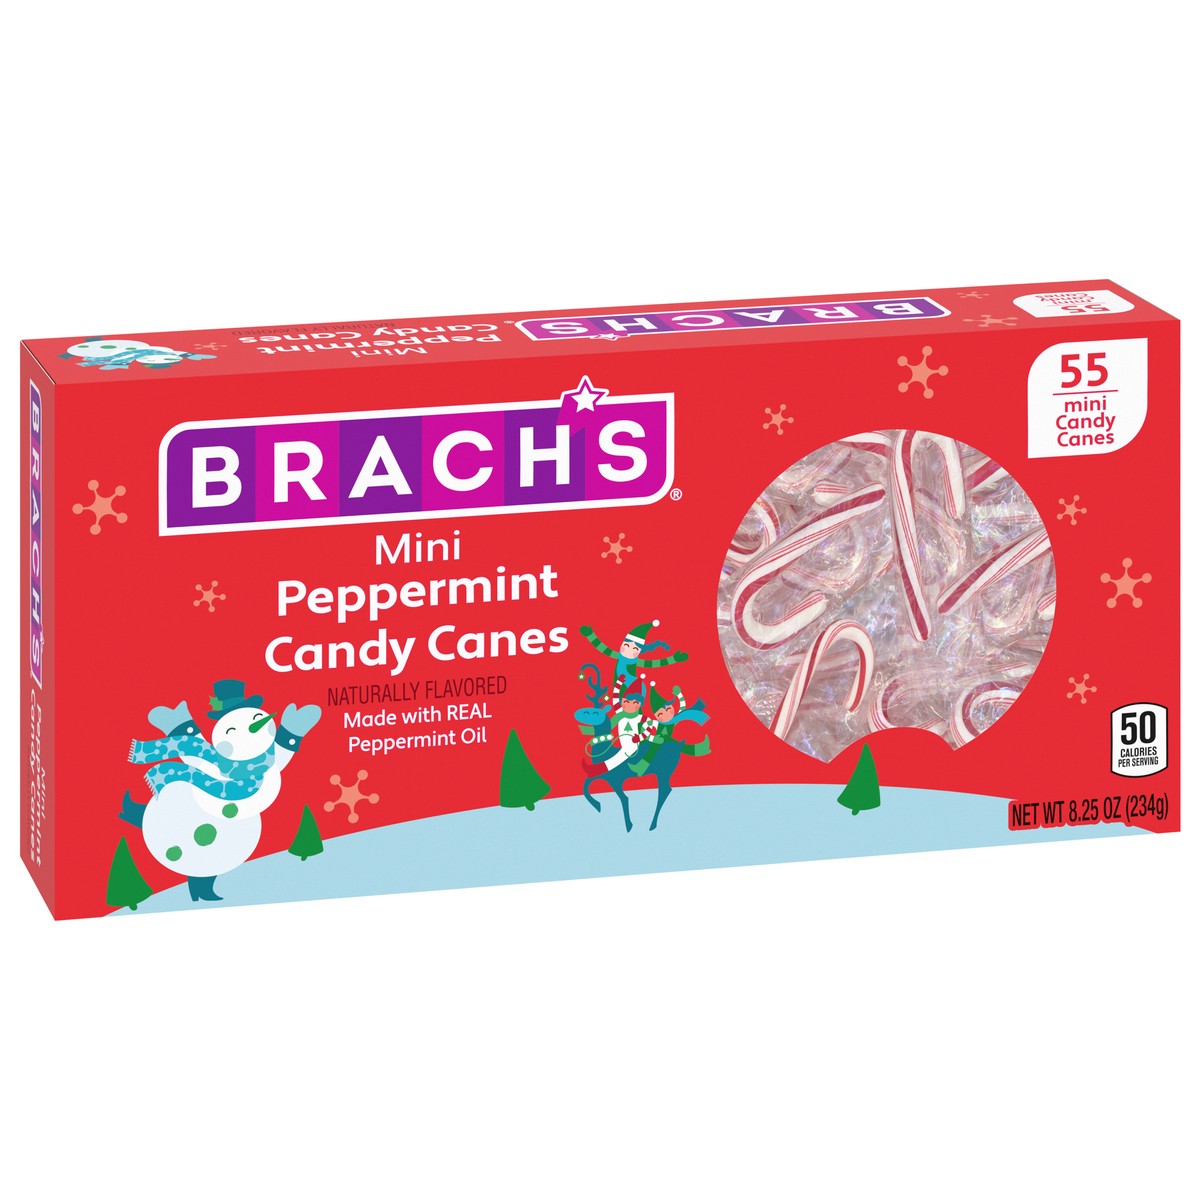 slide 2 of 9, Brach's Peppermint Candy Canes Mini 55 ea, 55 ct